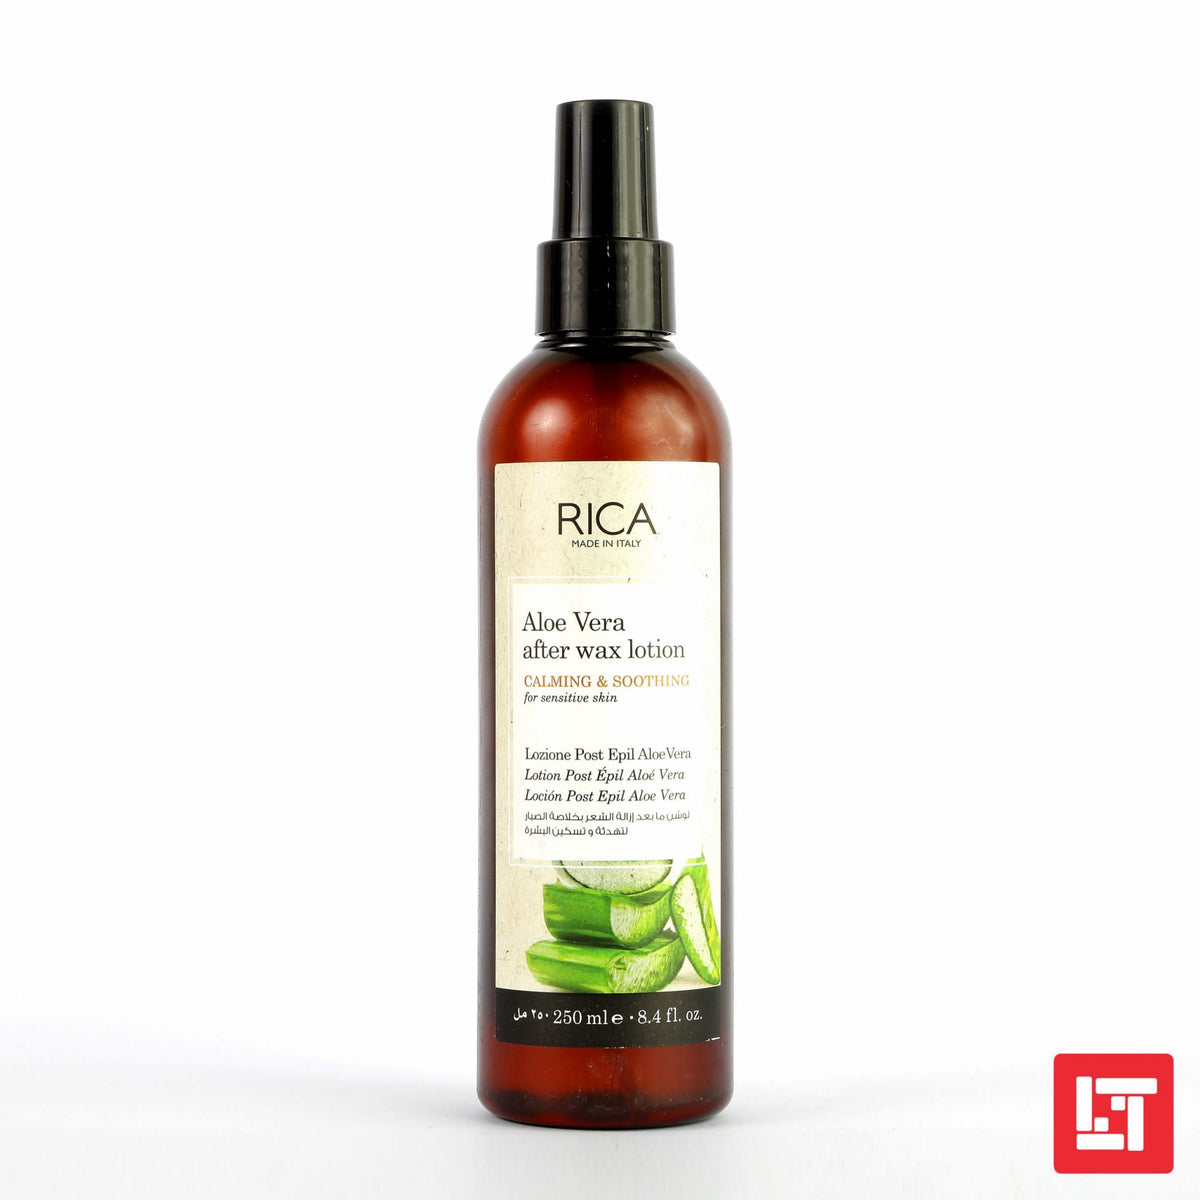 RICA Aloe Vera after Wax Lotion Calming &amp; Soothing for Sensitive Skin 250ml freeshipping - lasertag.pk